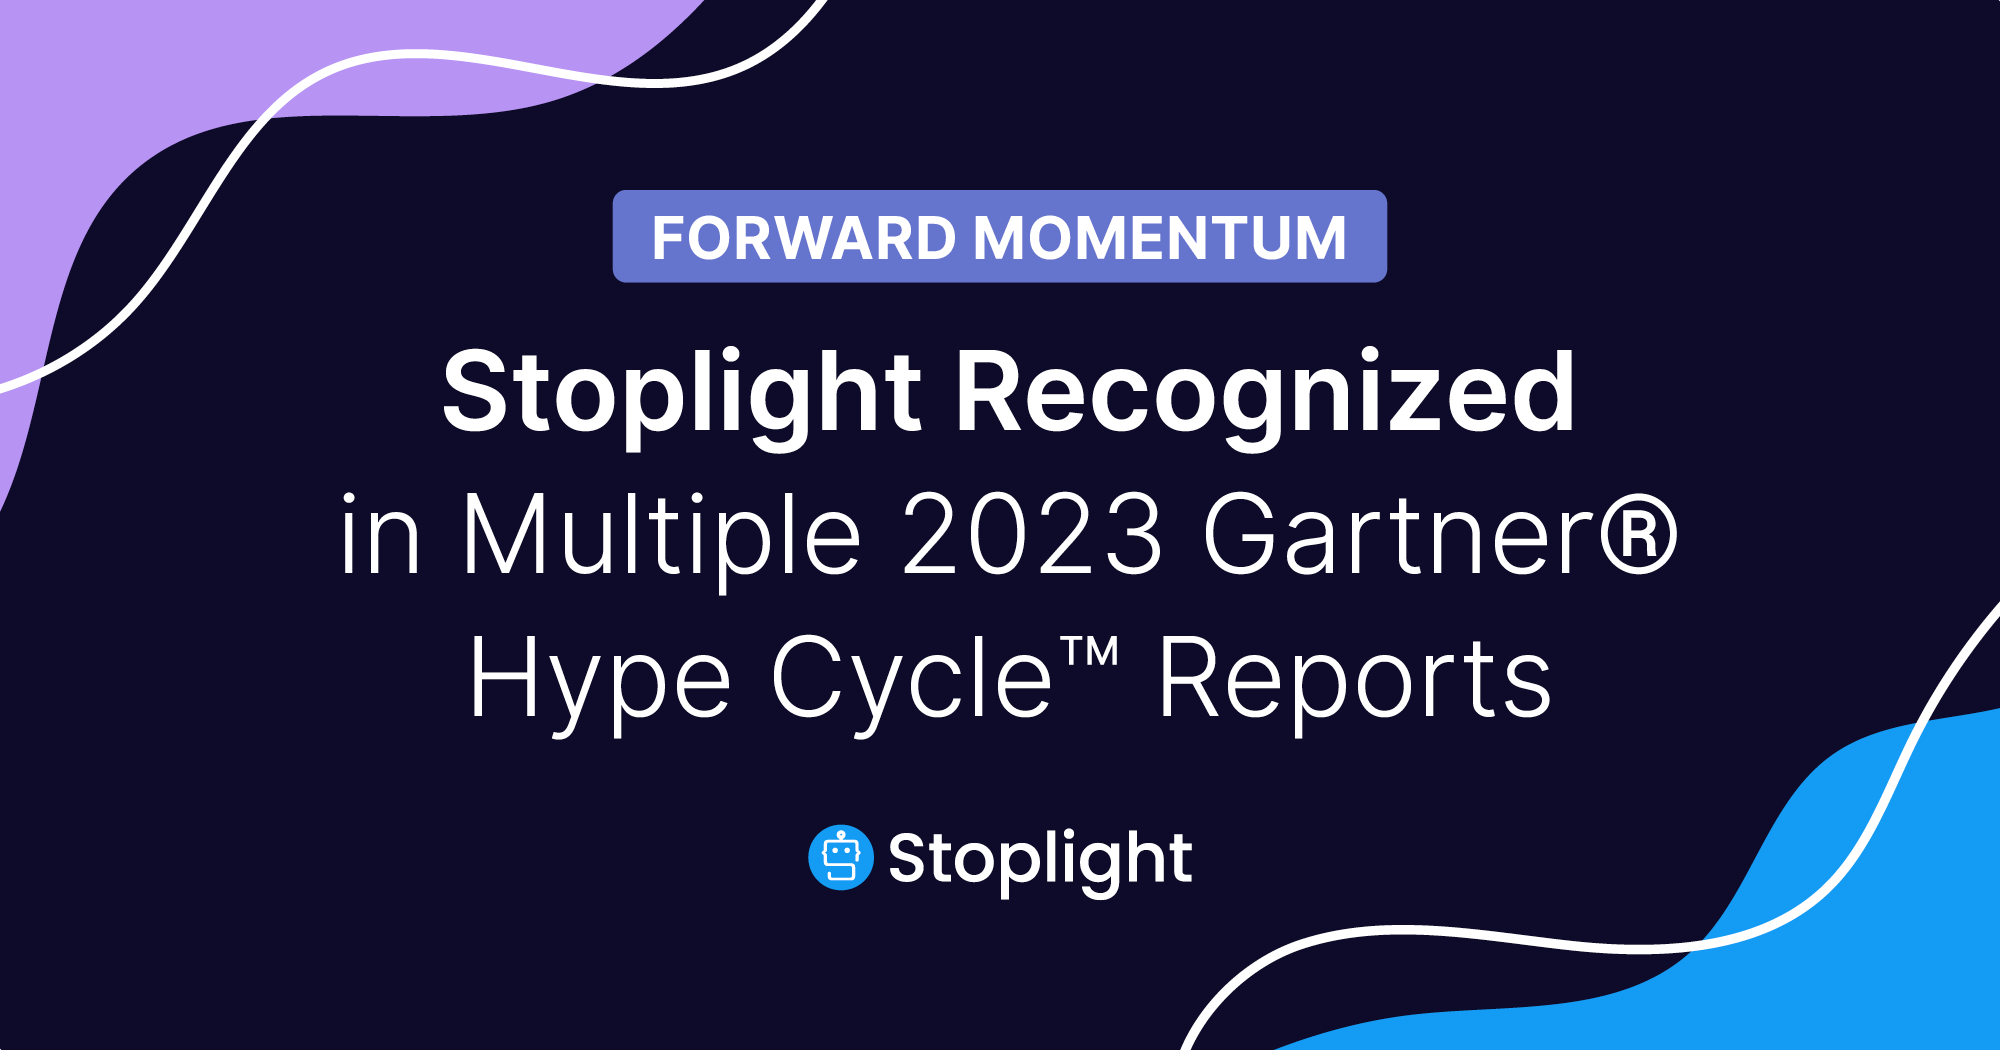 Forward Momentum: Stoplight Recognized in Multiple 2023 Gartner® Hype Cycle™ Reports